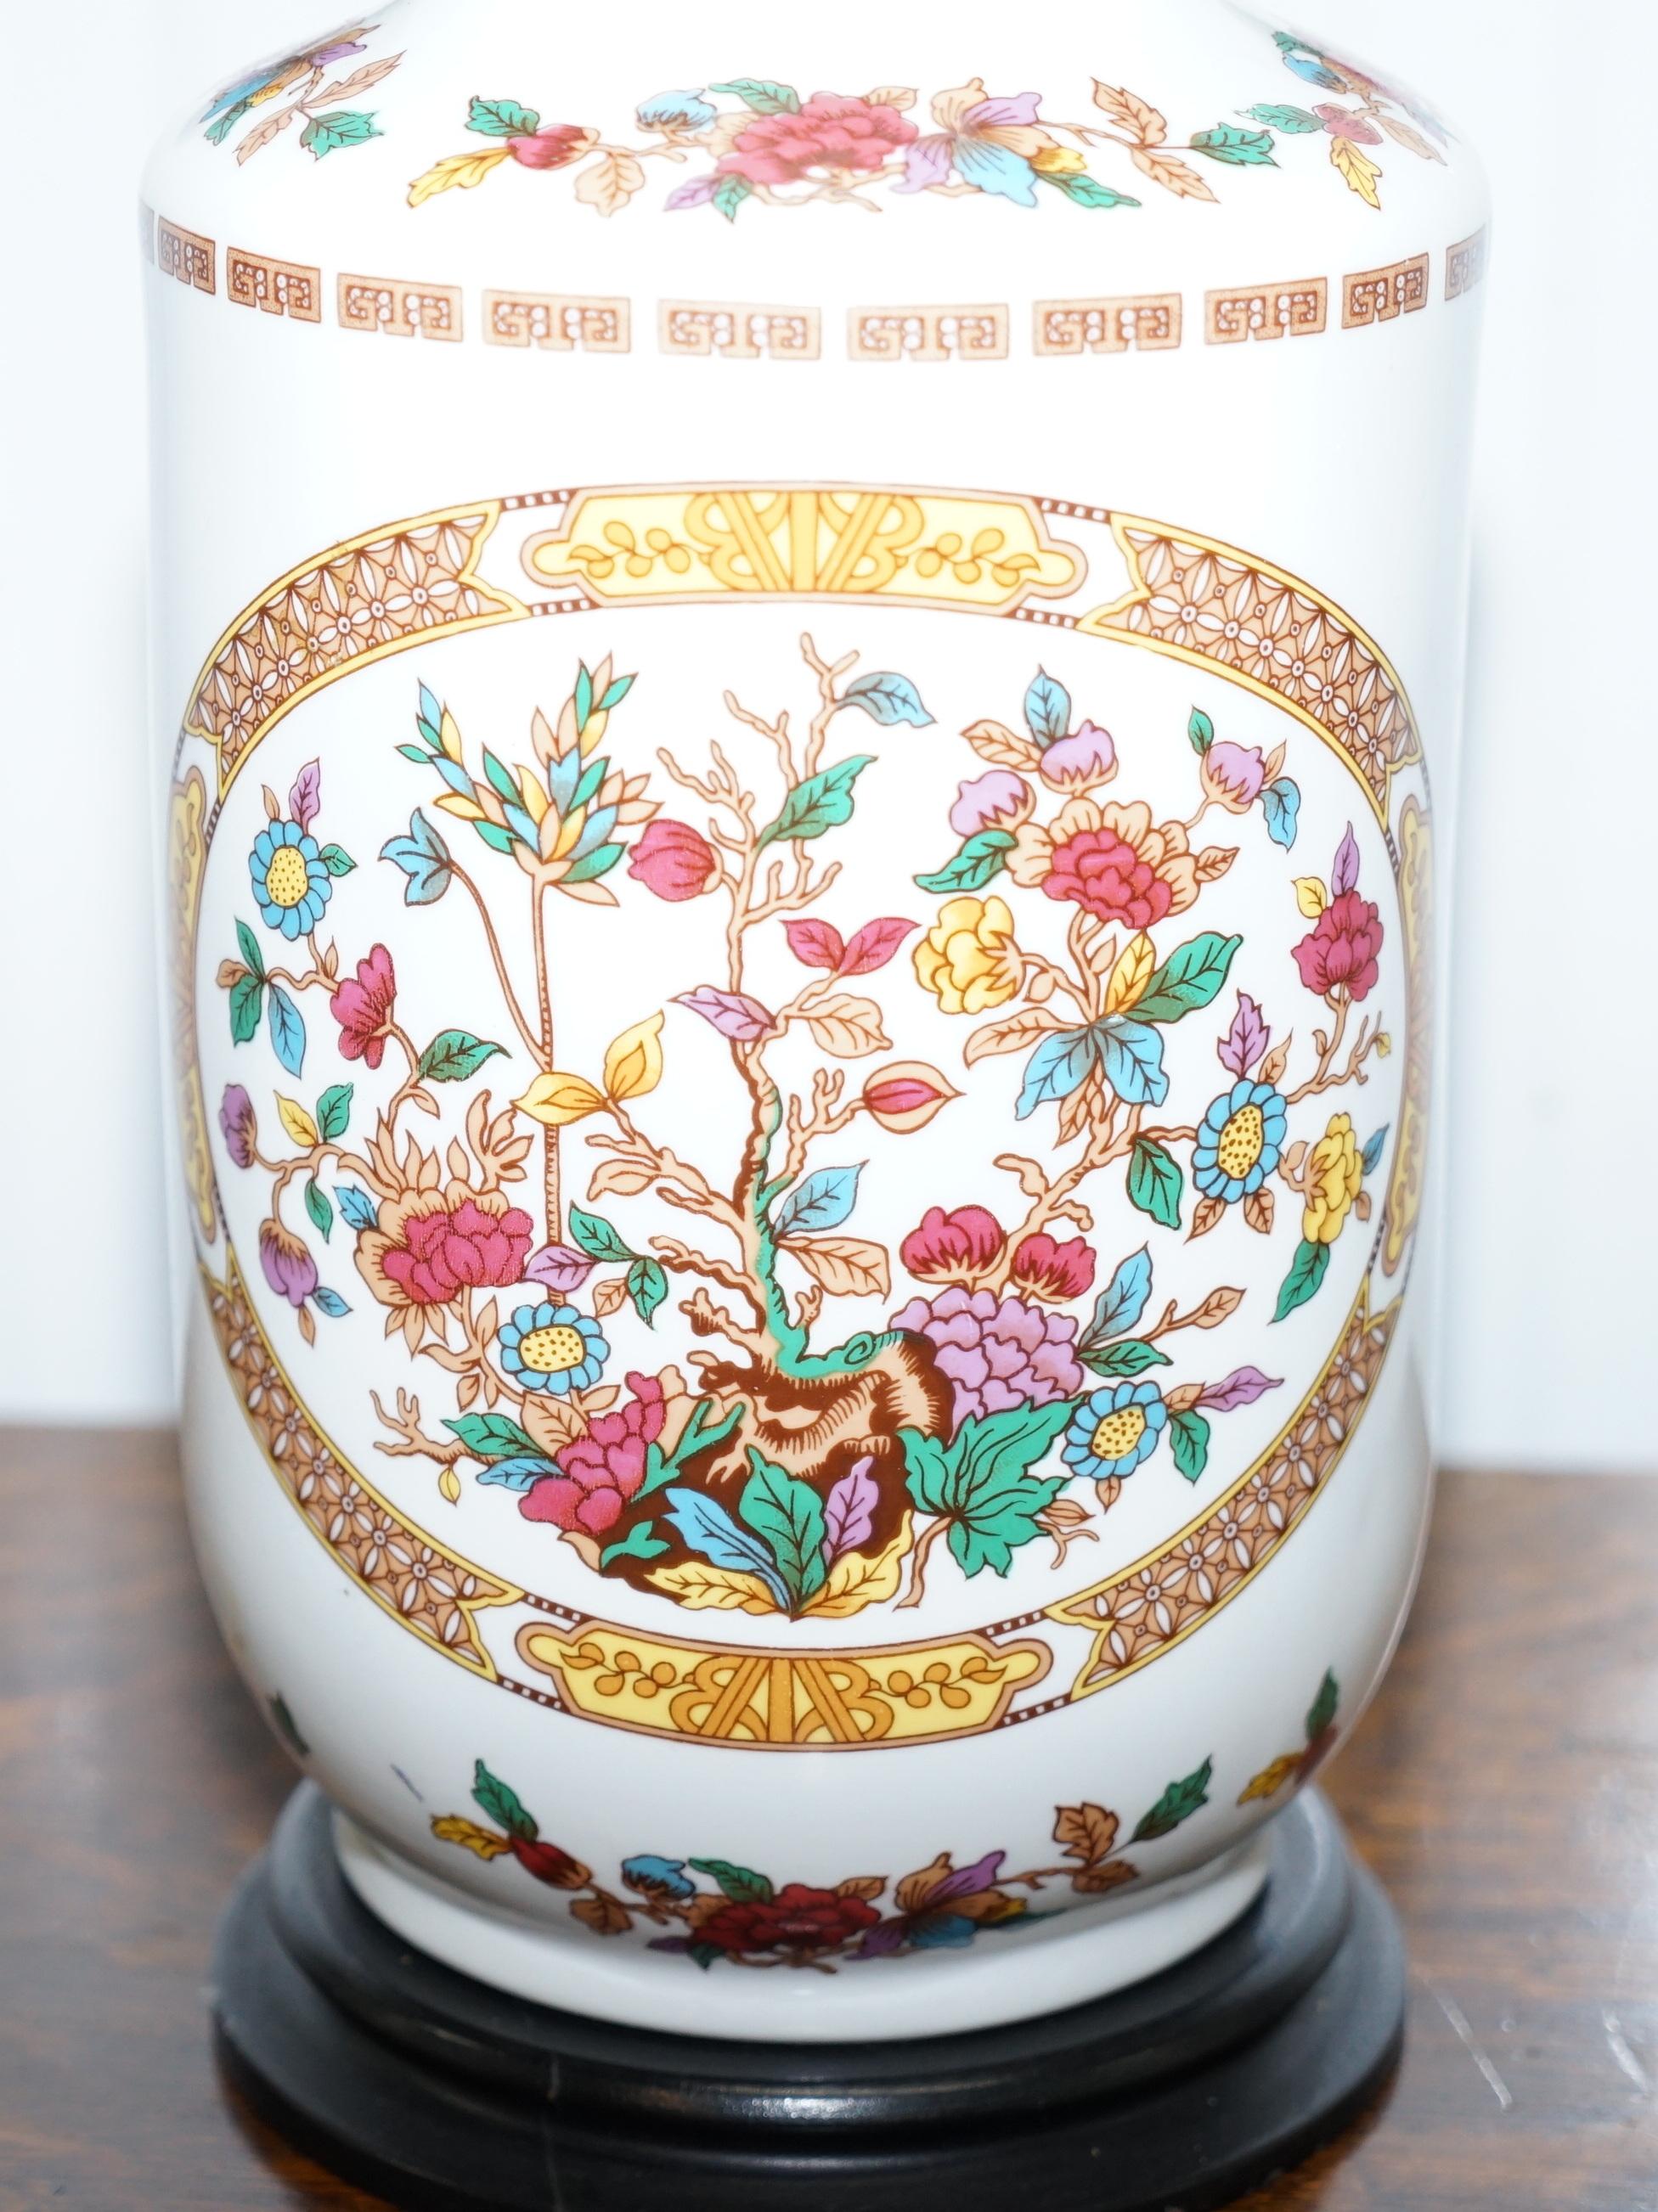 Porcelain Lovely Decorative Chinese Vase Converted into a Table Lamp Decorative Piece For Sale